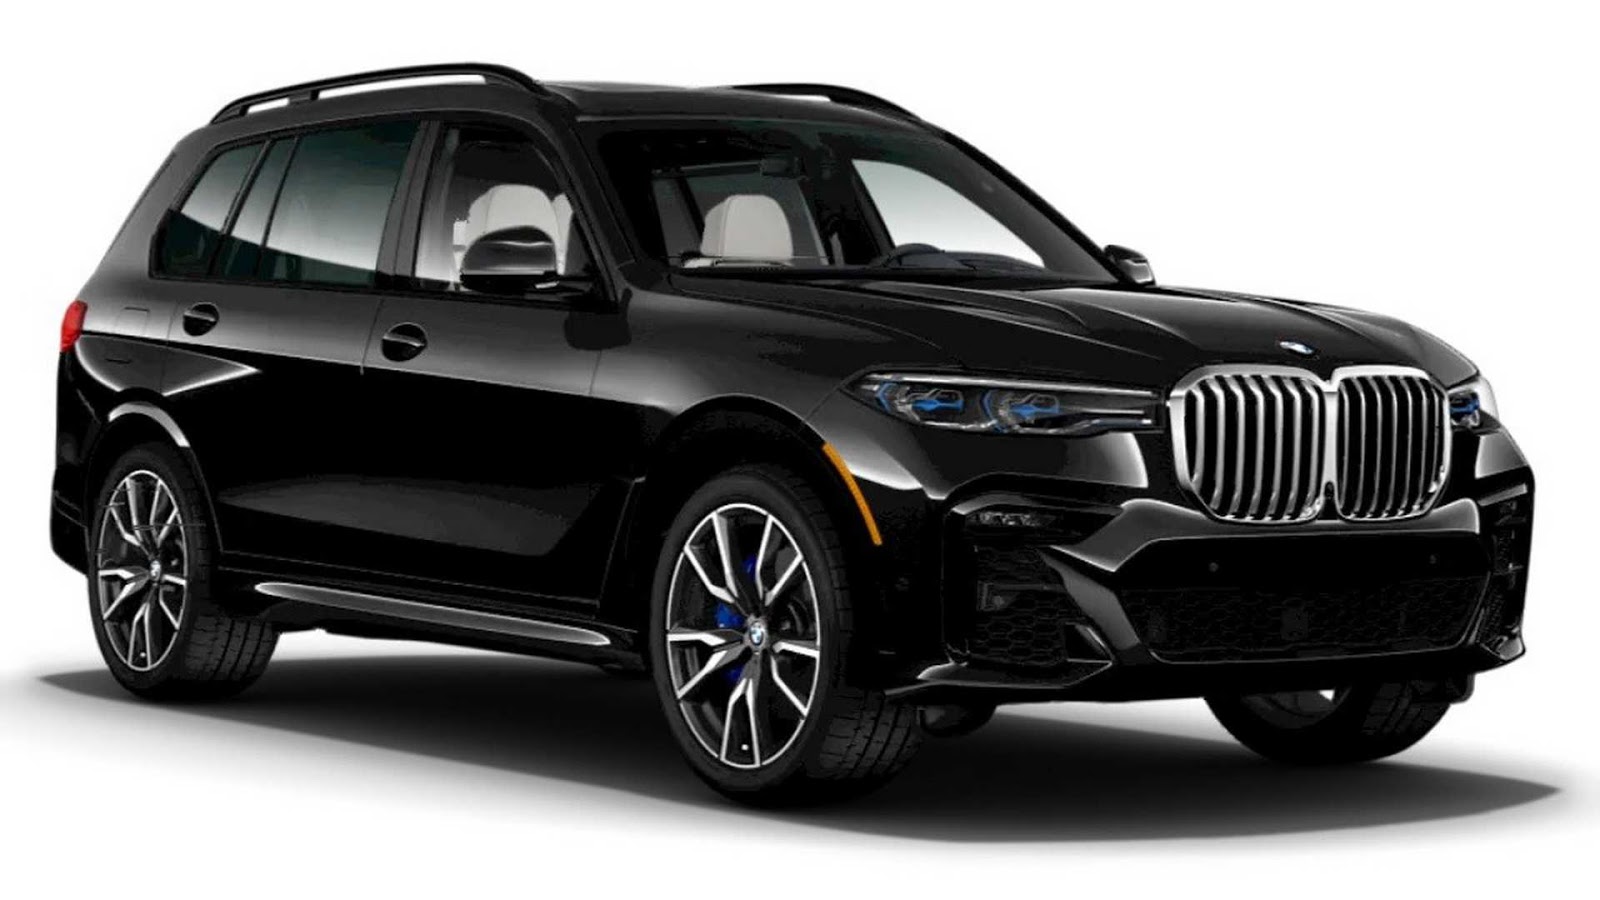 BMW X7 SUV is to be launched on 25 july